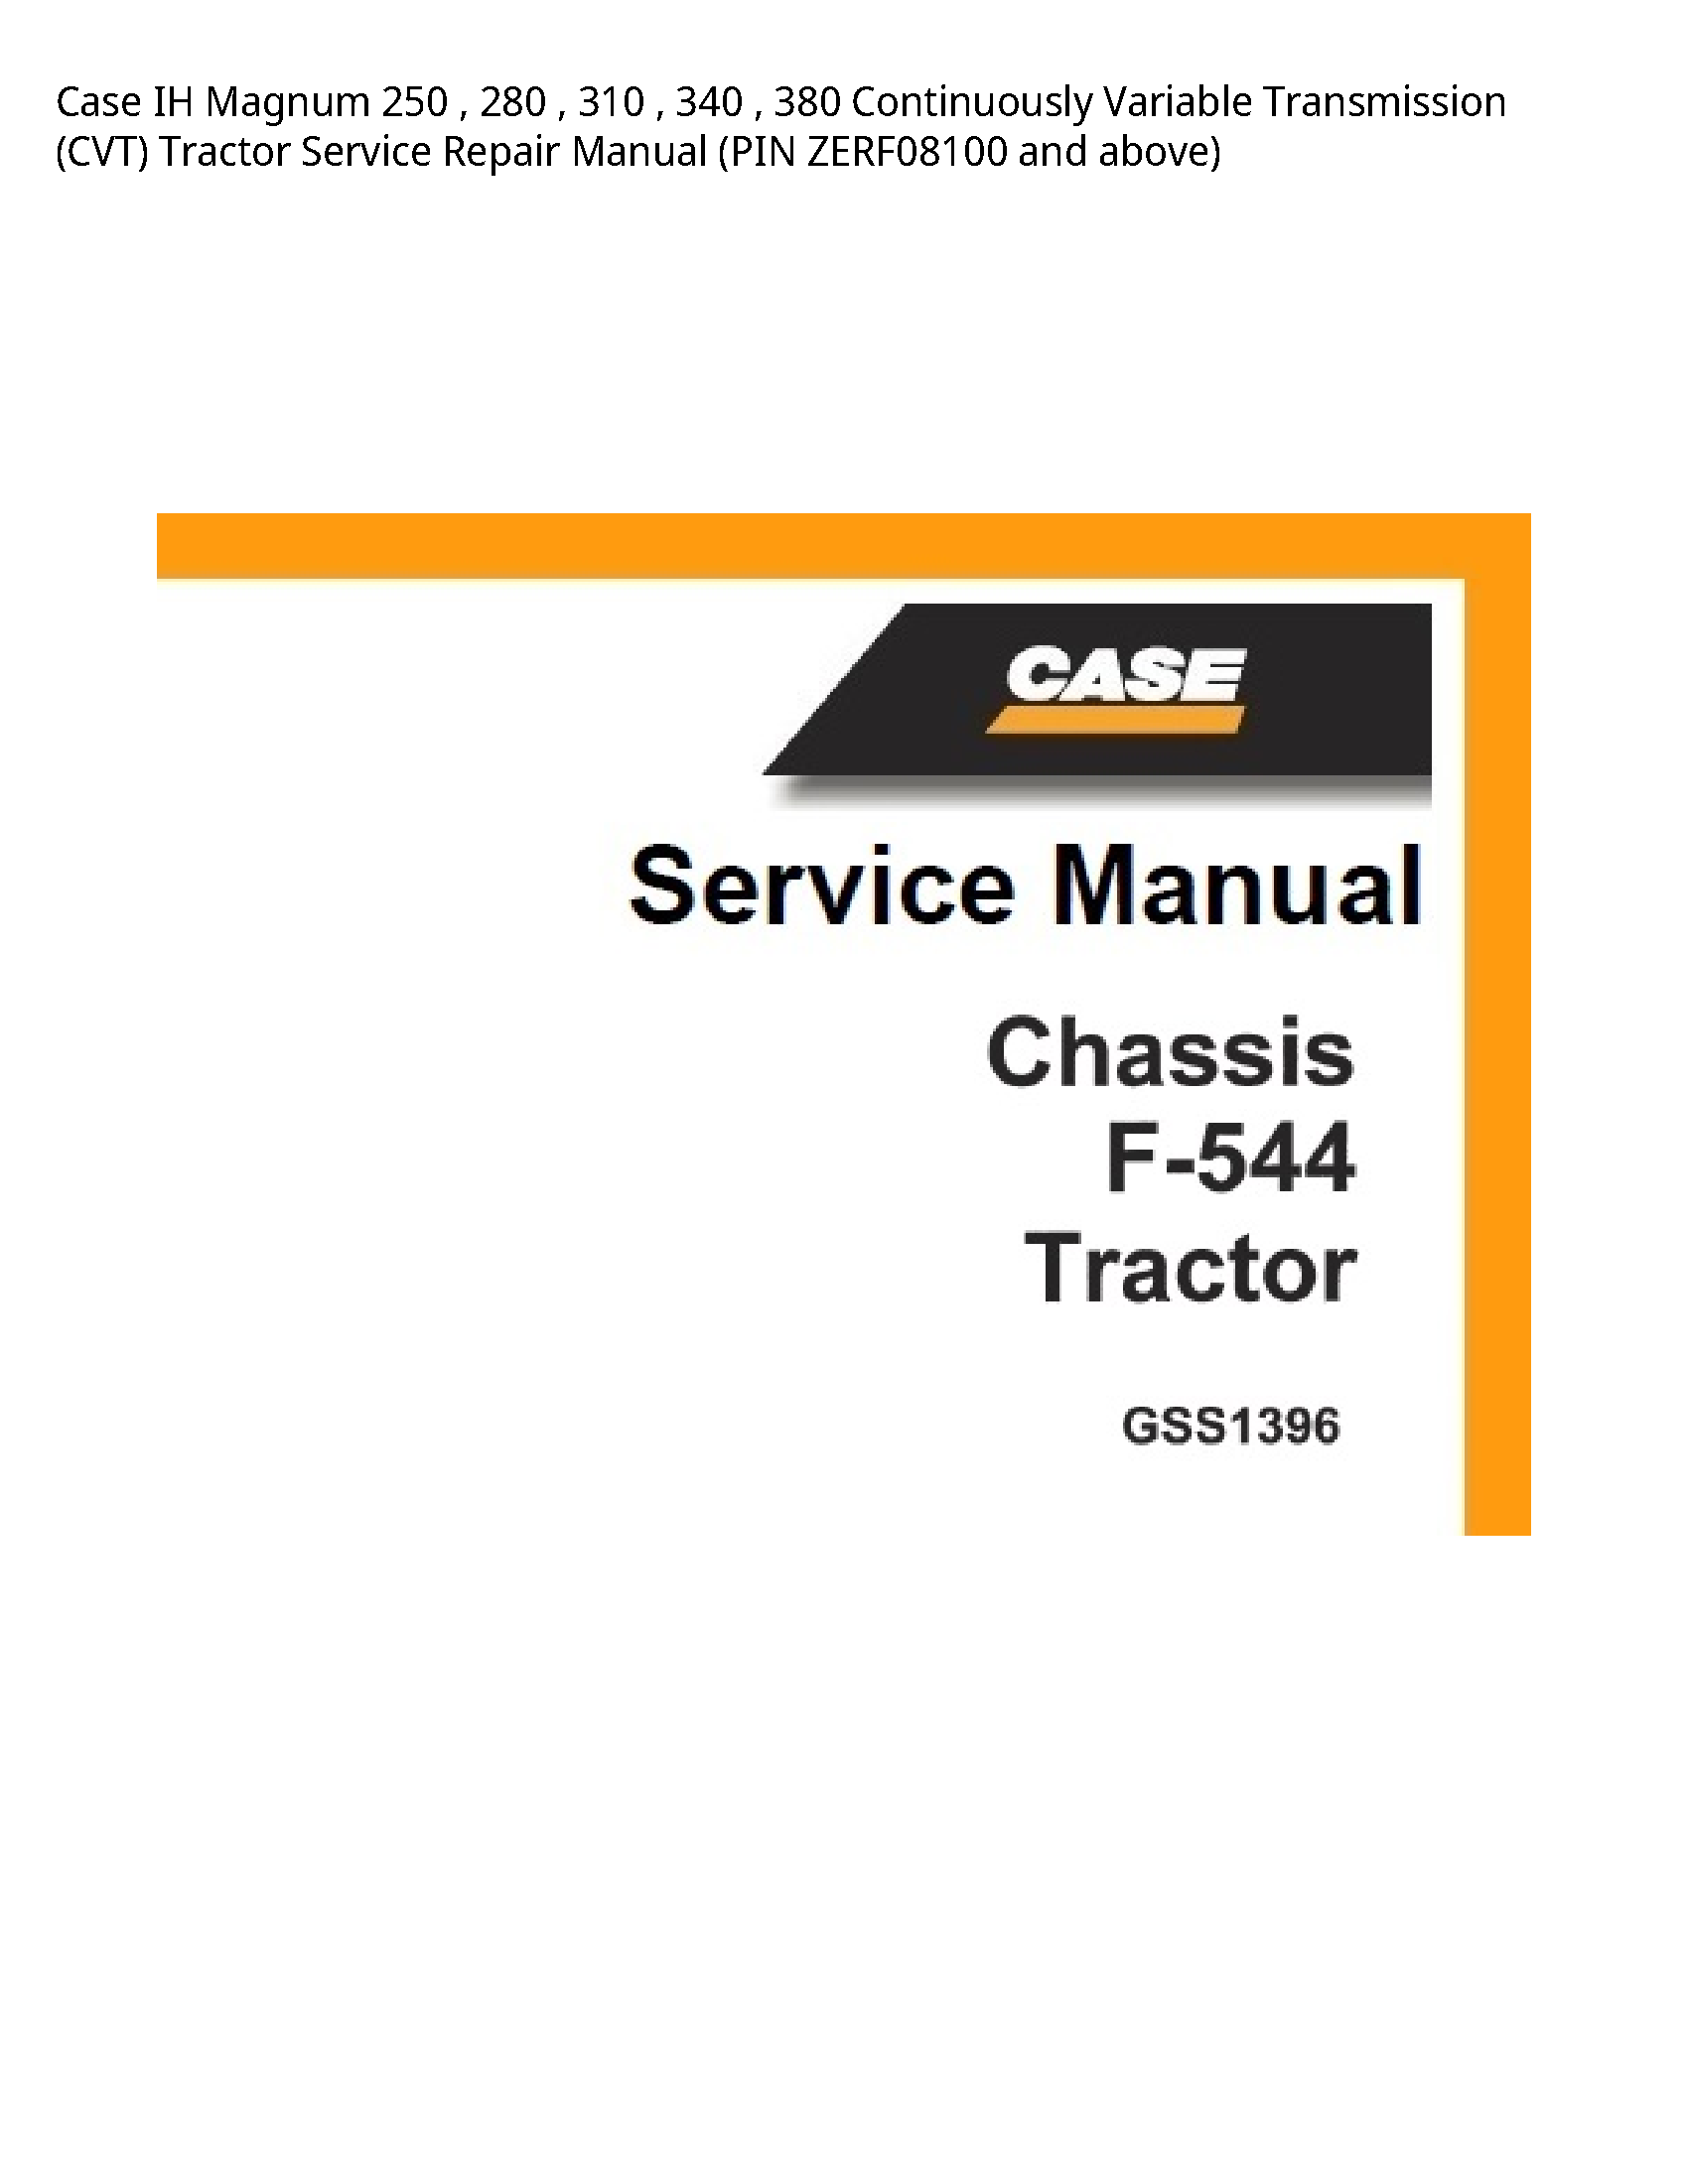 Case/Case IH 250 IH Magnum Continuously Variable Transmission (CVT) Tractor manual